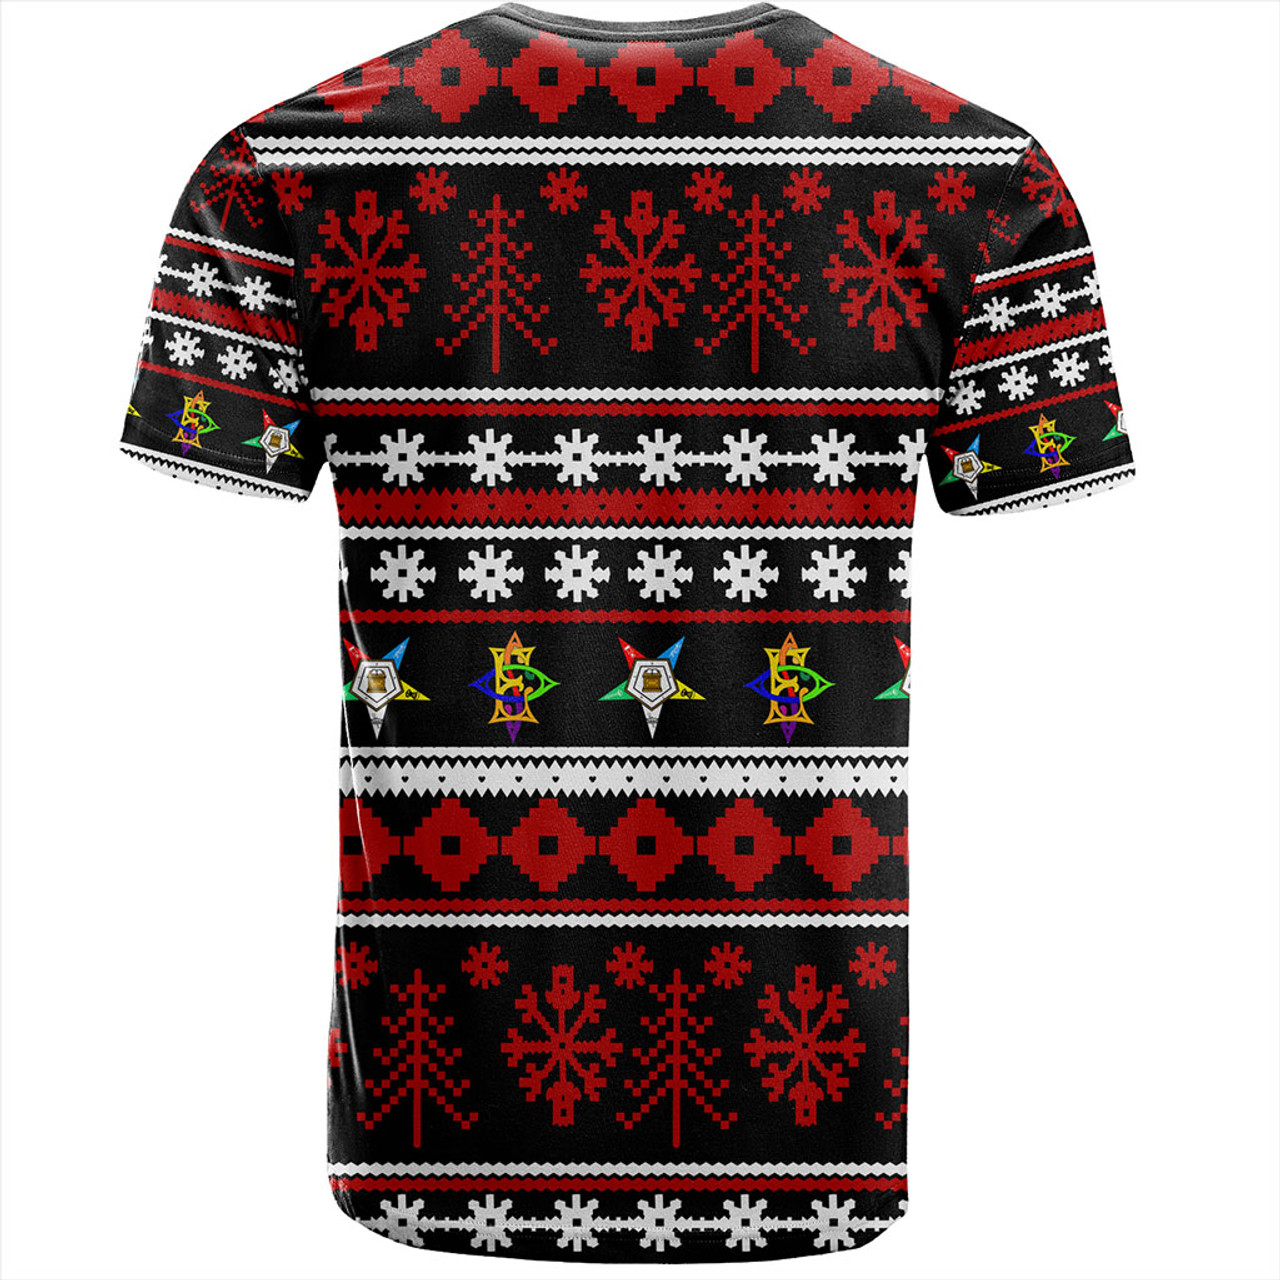 Order of the Eastern Star T-Shirt Christmas Style Grunge